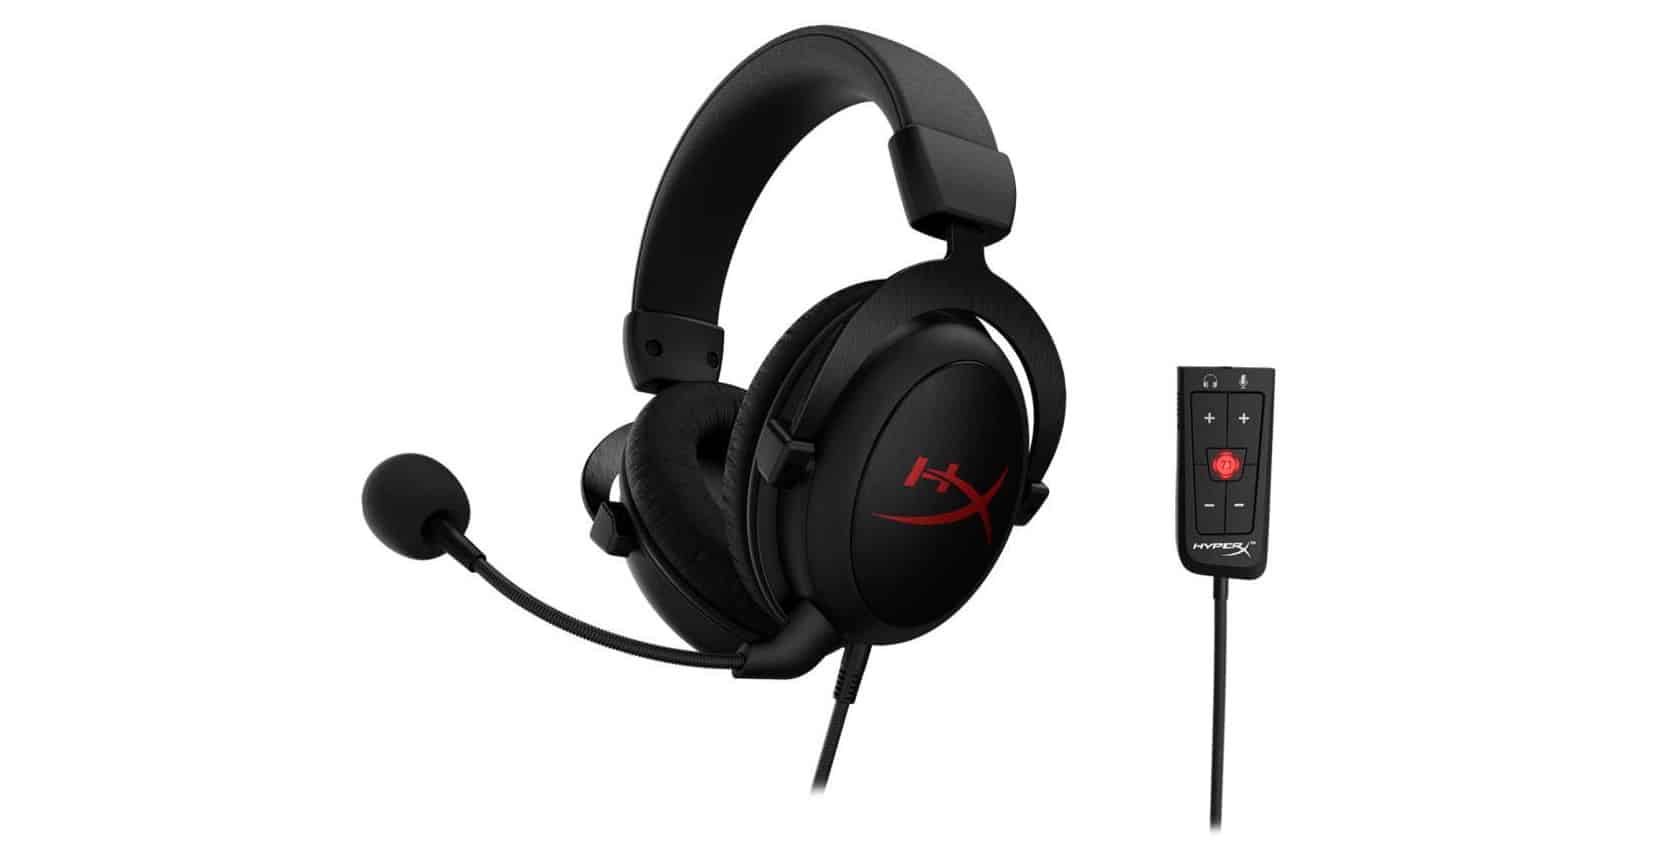 Headphones with Built-in Microphone and Control Module